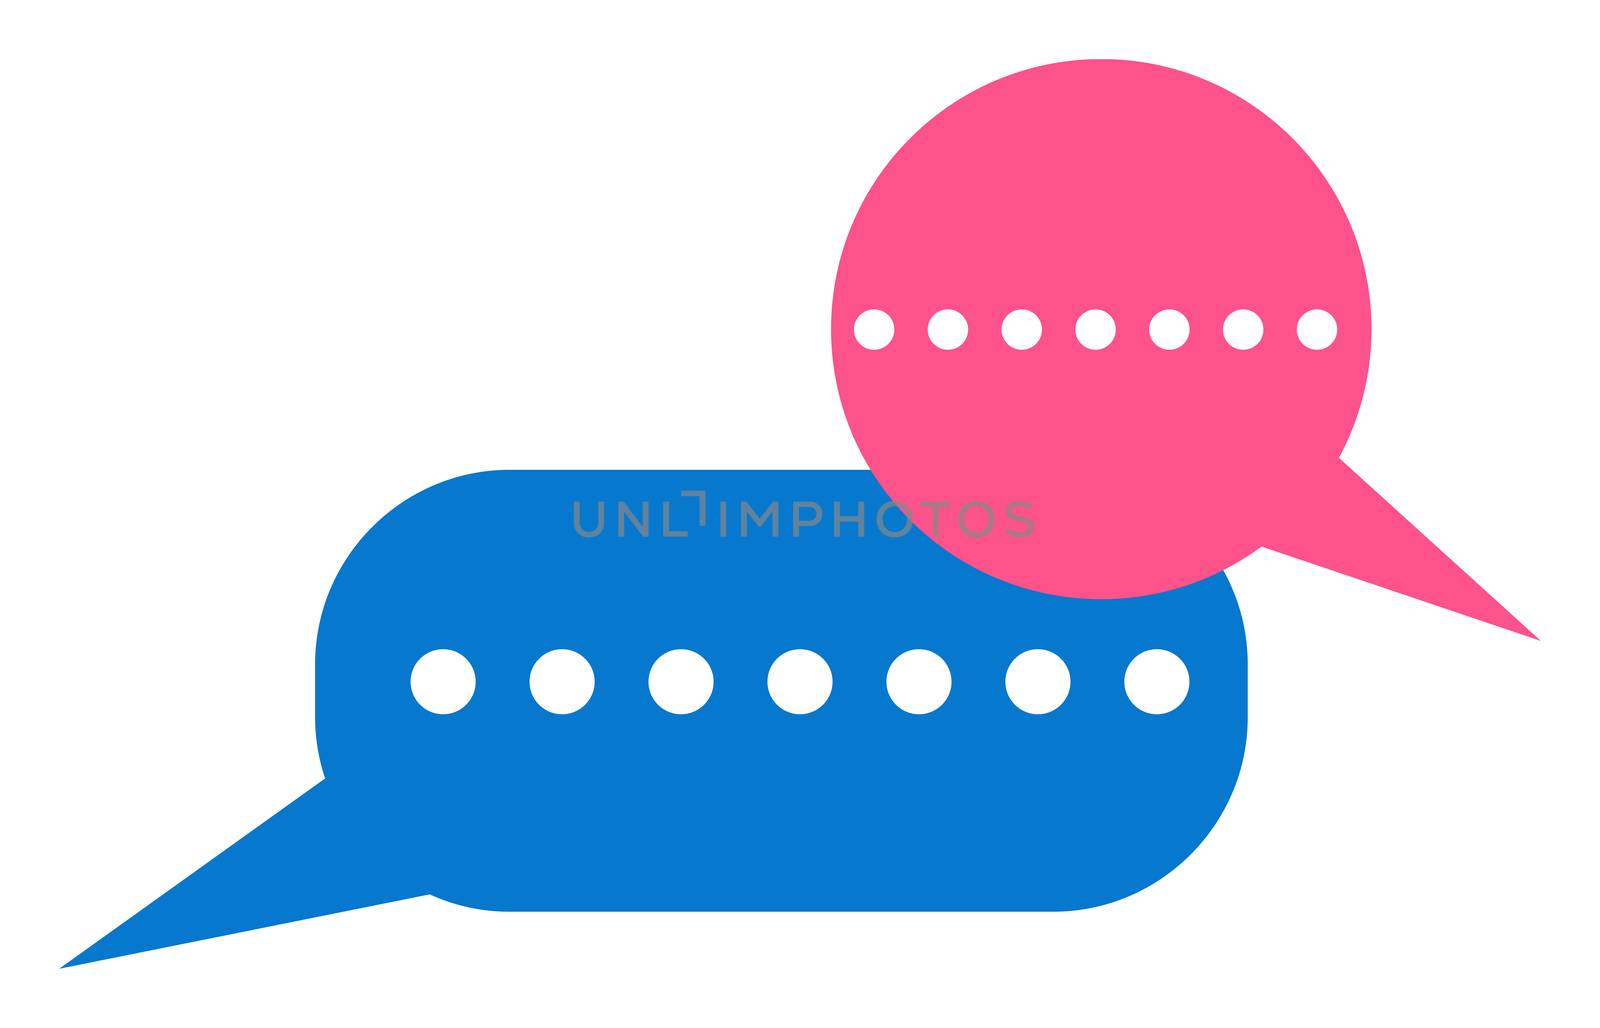 Online chat bubble, illustration, vector on white background